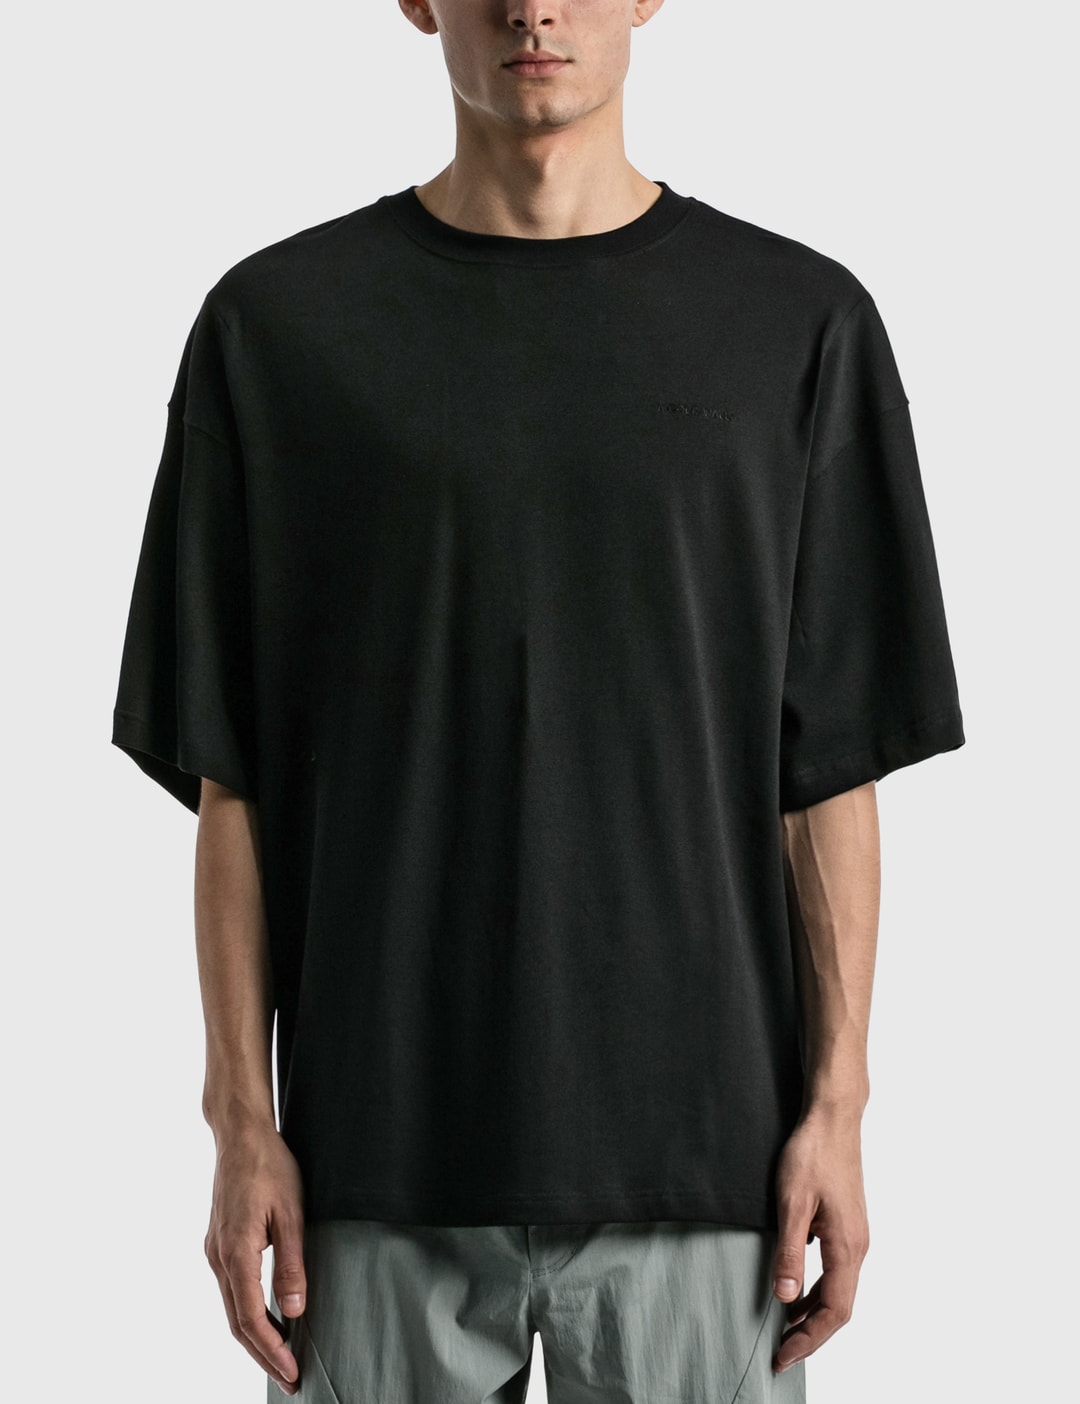 A-COLD-WALL* - Embroidered Logo T-shirt | HBX - Globally Curated ...